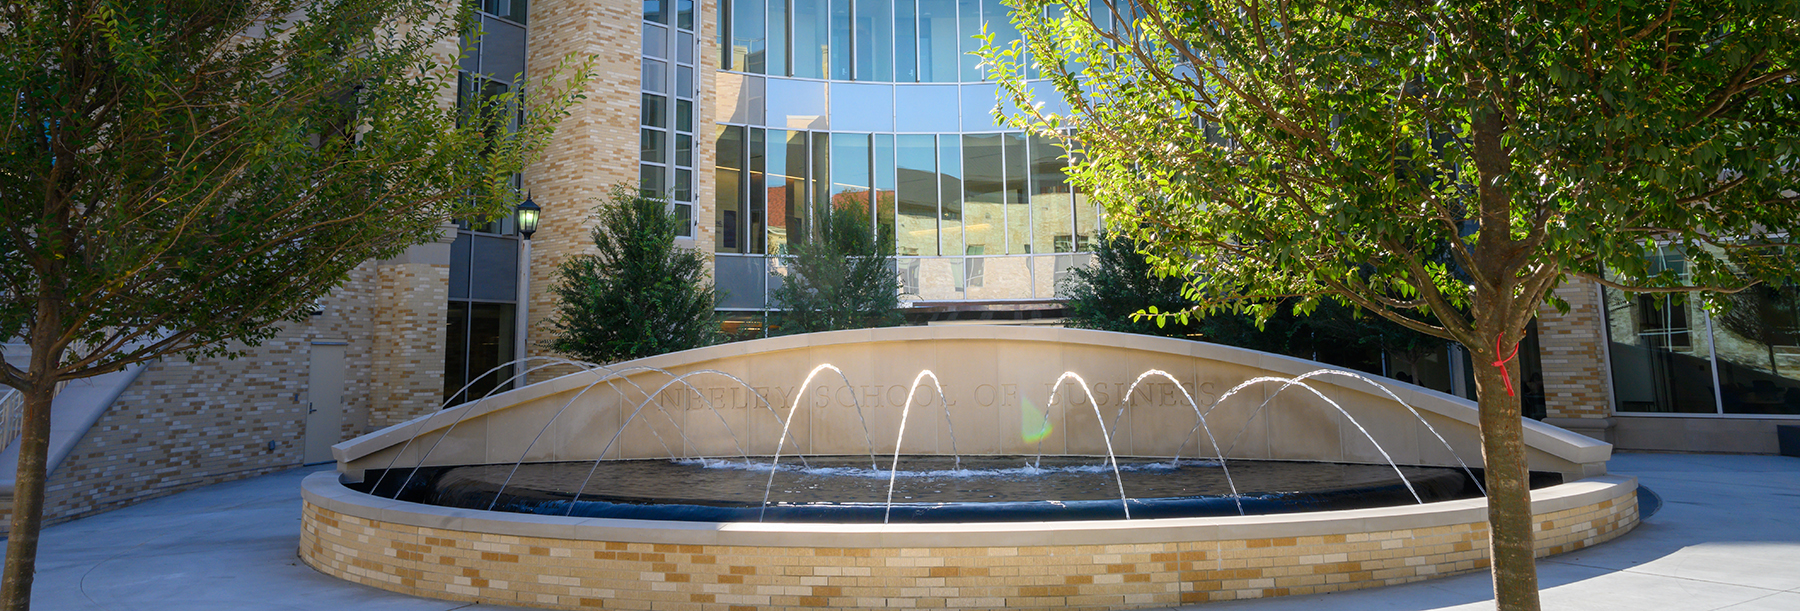 Section Image: Neeley fountain 